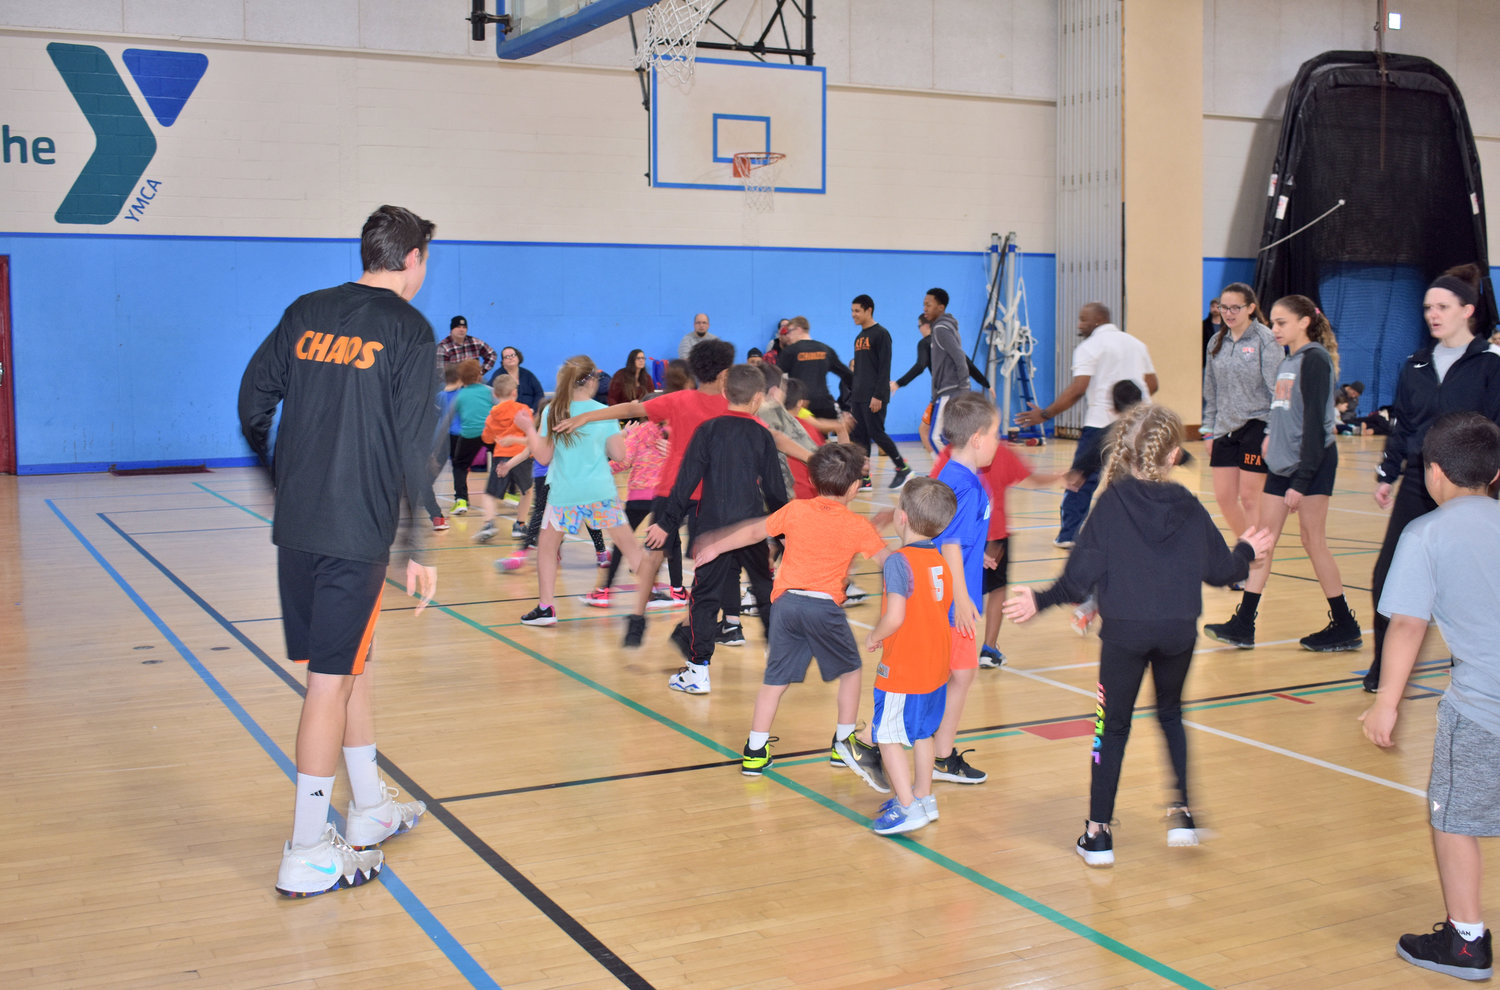 TEACHING AND LEARNING — Members of the Rome Free Academy boys and girls varsity  basketball teams help instruct youth in grades kindergarten through second during a recent learn to play basketball clinic session.